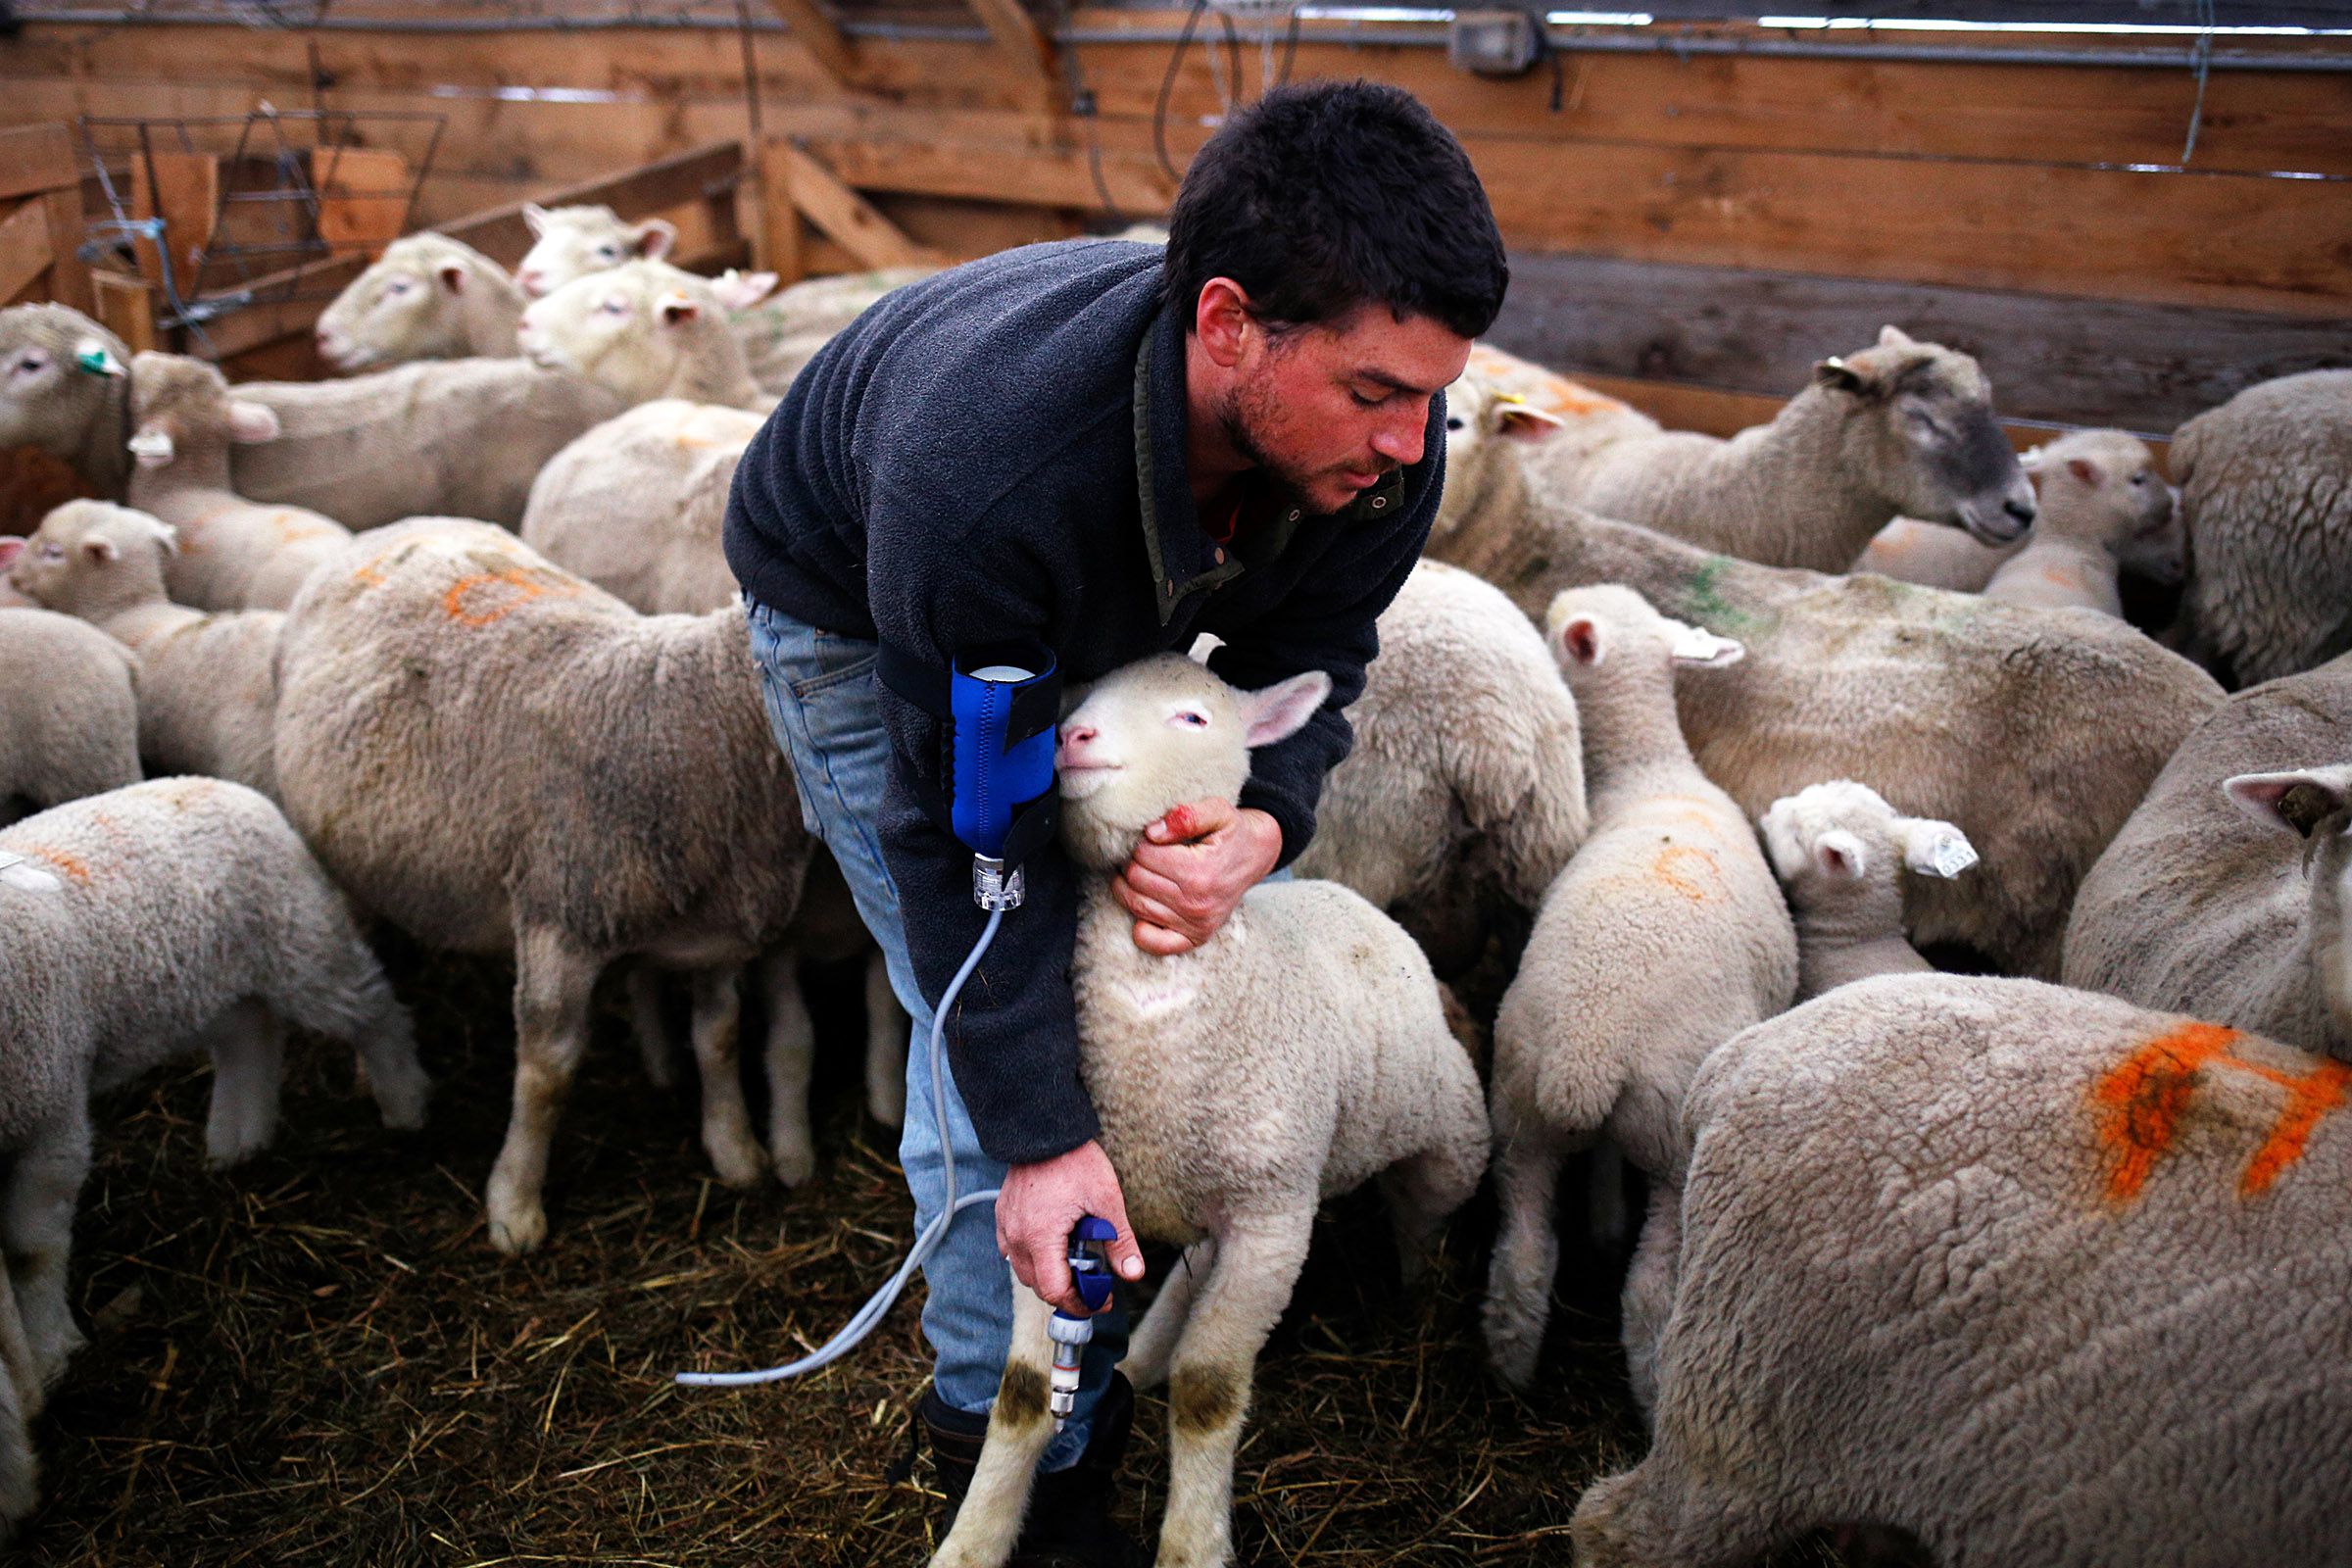 Animal manager Chris Bonasia grabs a lamb to vaccinate at Sunrise Farm in White River Junction, Vt., on Monday, April 8, 2019. Bonasia spent about half an hour injecting the roughly 125 lambs, a routine that occurs twice a year. (Valley News - Joseph Ressler) Copyright Valley News. May not be reprinted or used online without permission. Send requests to permission@vnews.com.